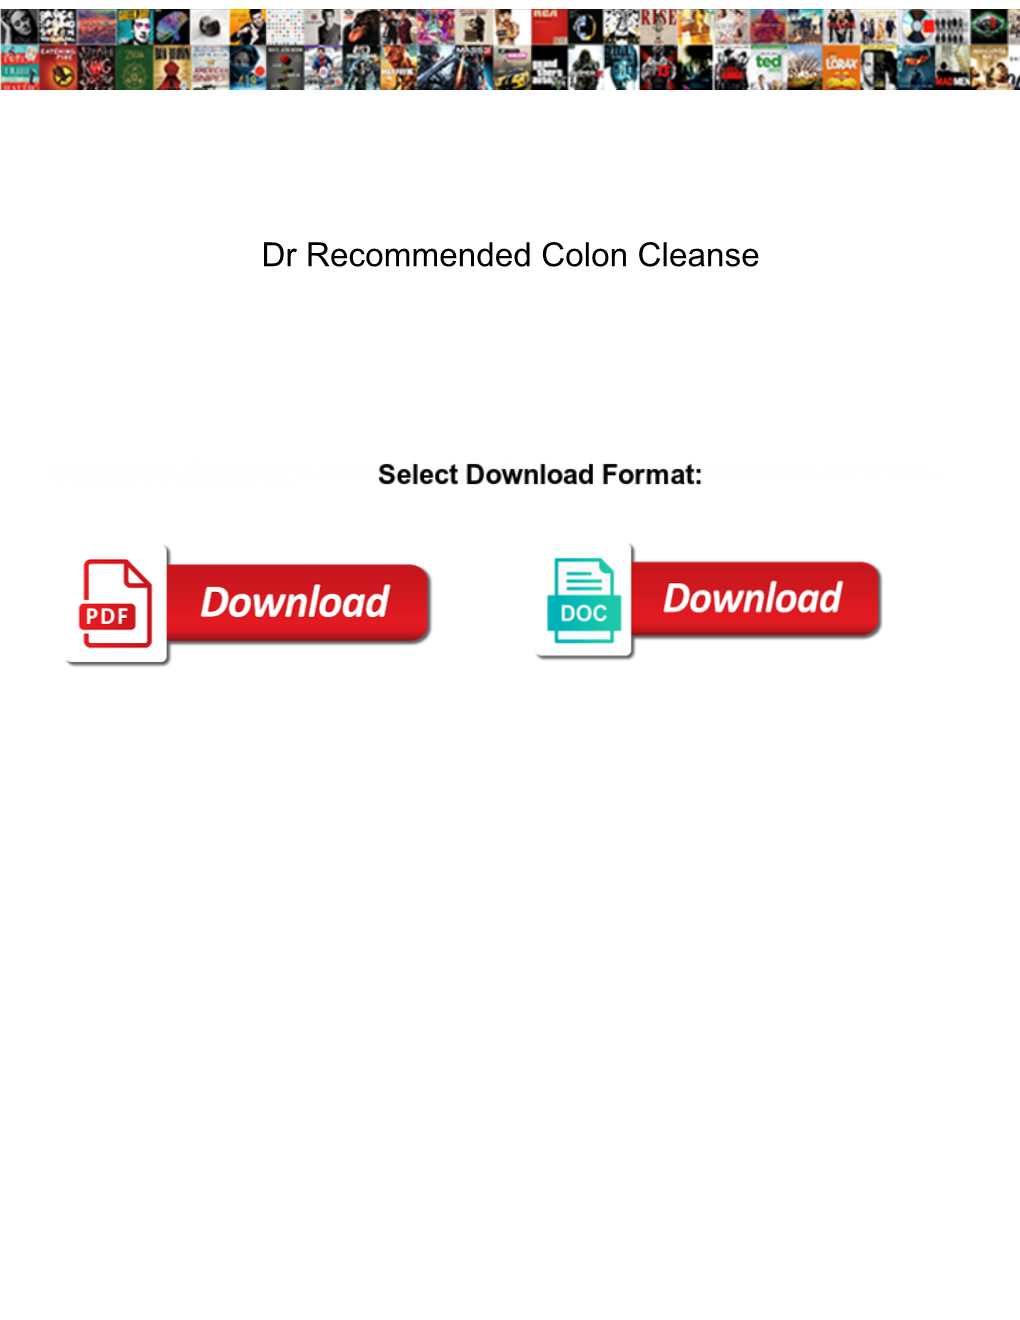 Dr Recommended Colon Cleanse